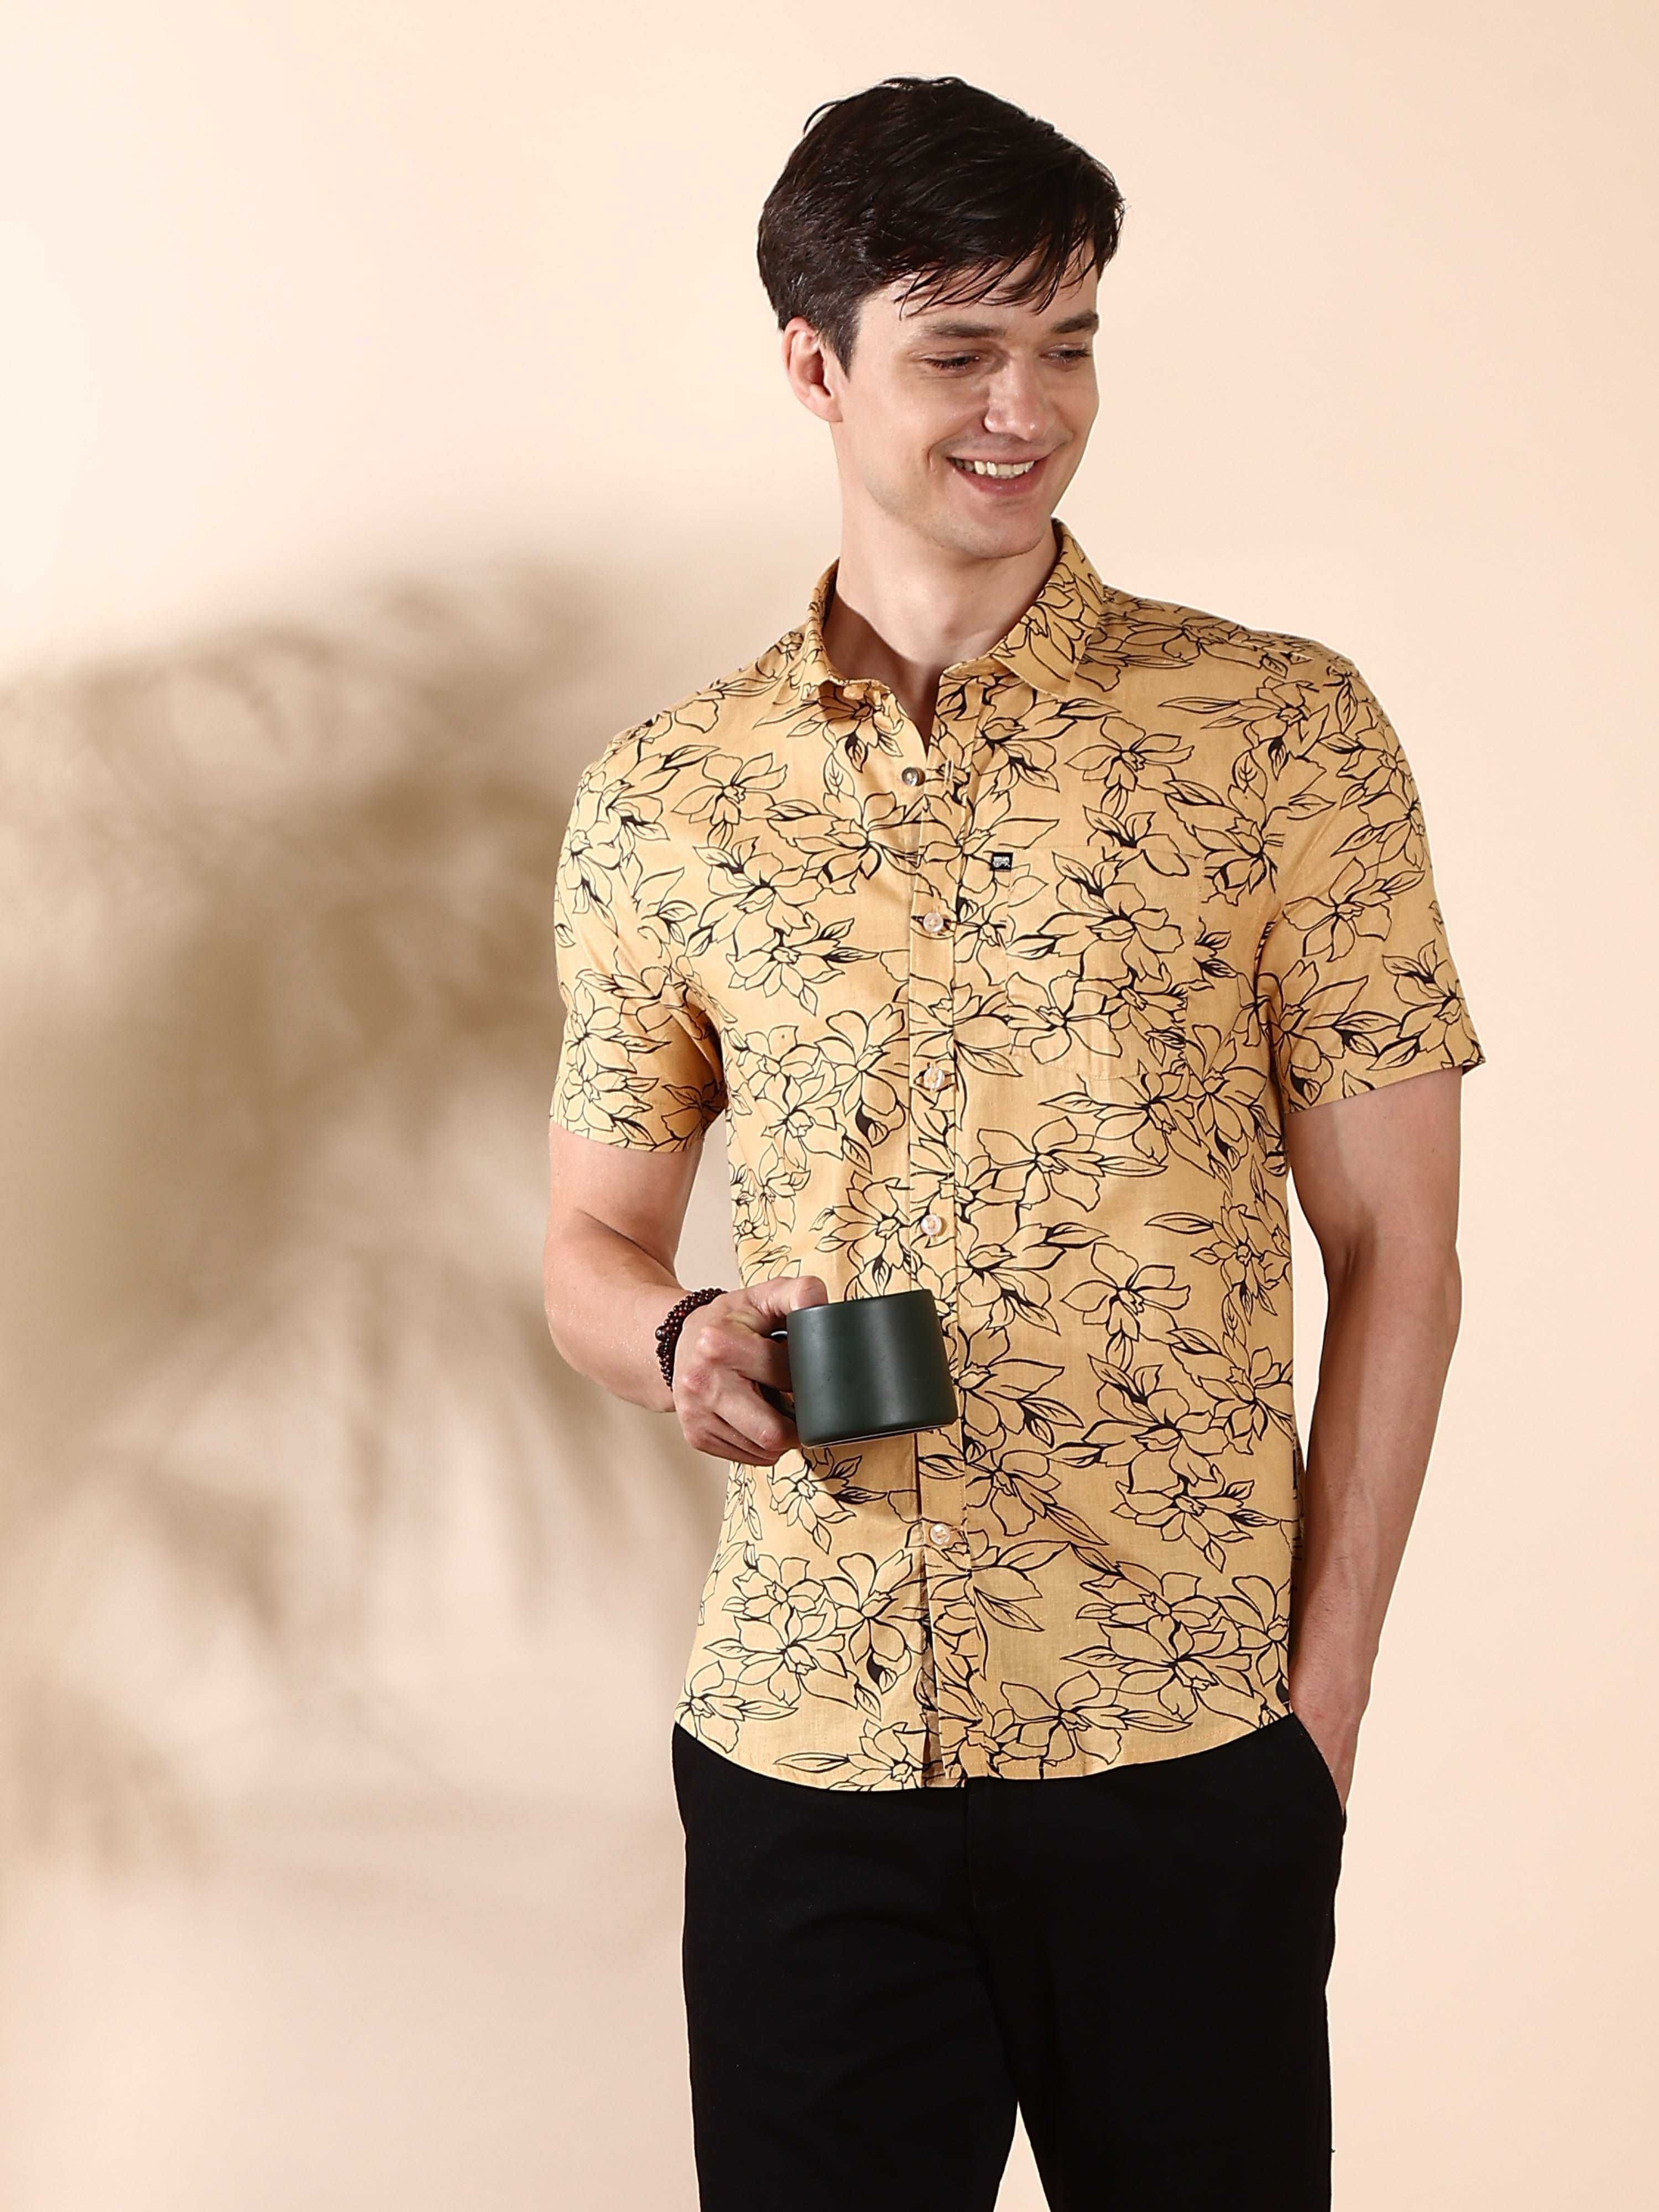 Beige casual floral AOP half sleeve shirt shop online at Estilocus. • Half-sleeve check shirt• Cut and sew placket• Regular collar• Single pocket with logo embroidery• Curved hemline• Finest quality sewing• Machine wash care• Suitable to wear with all typ